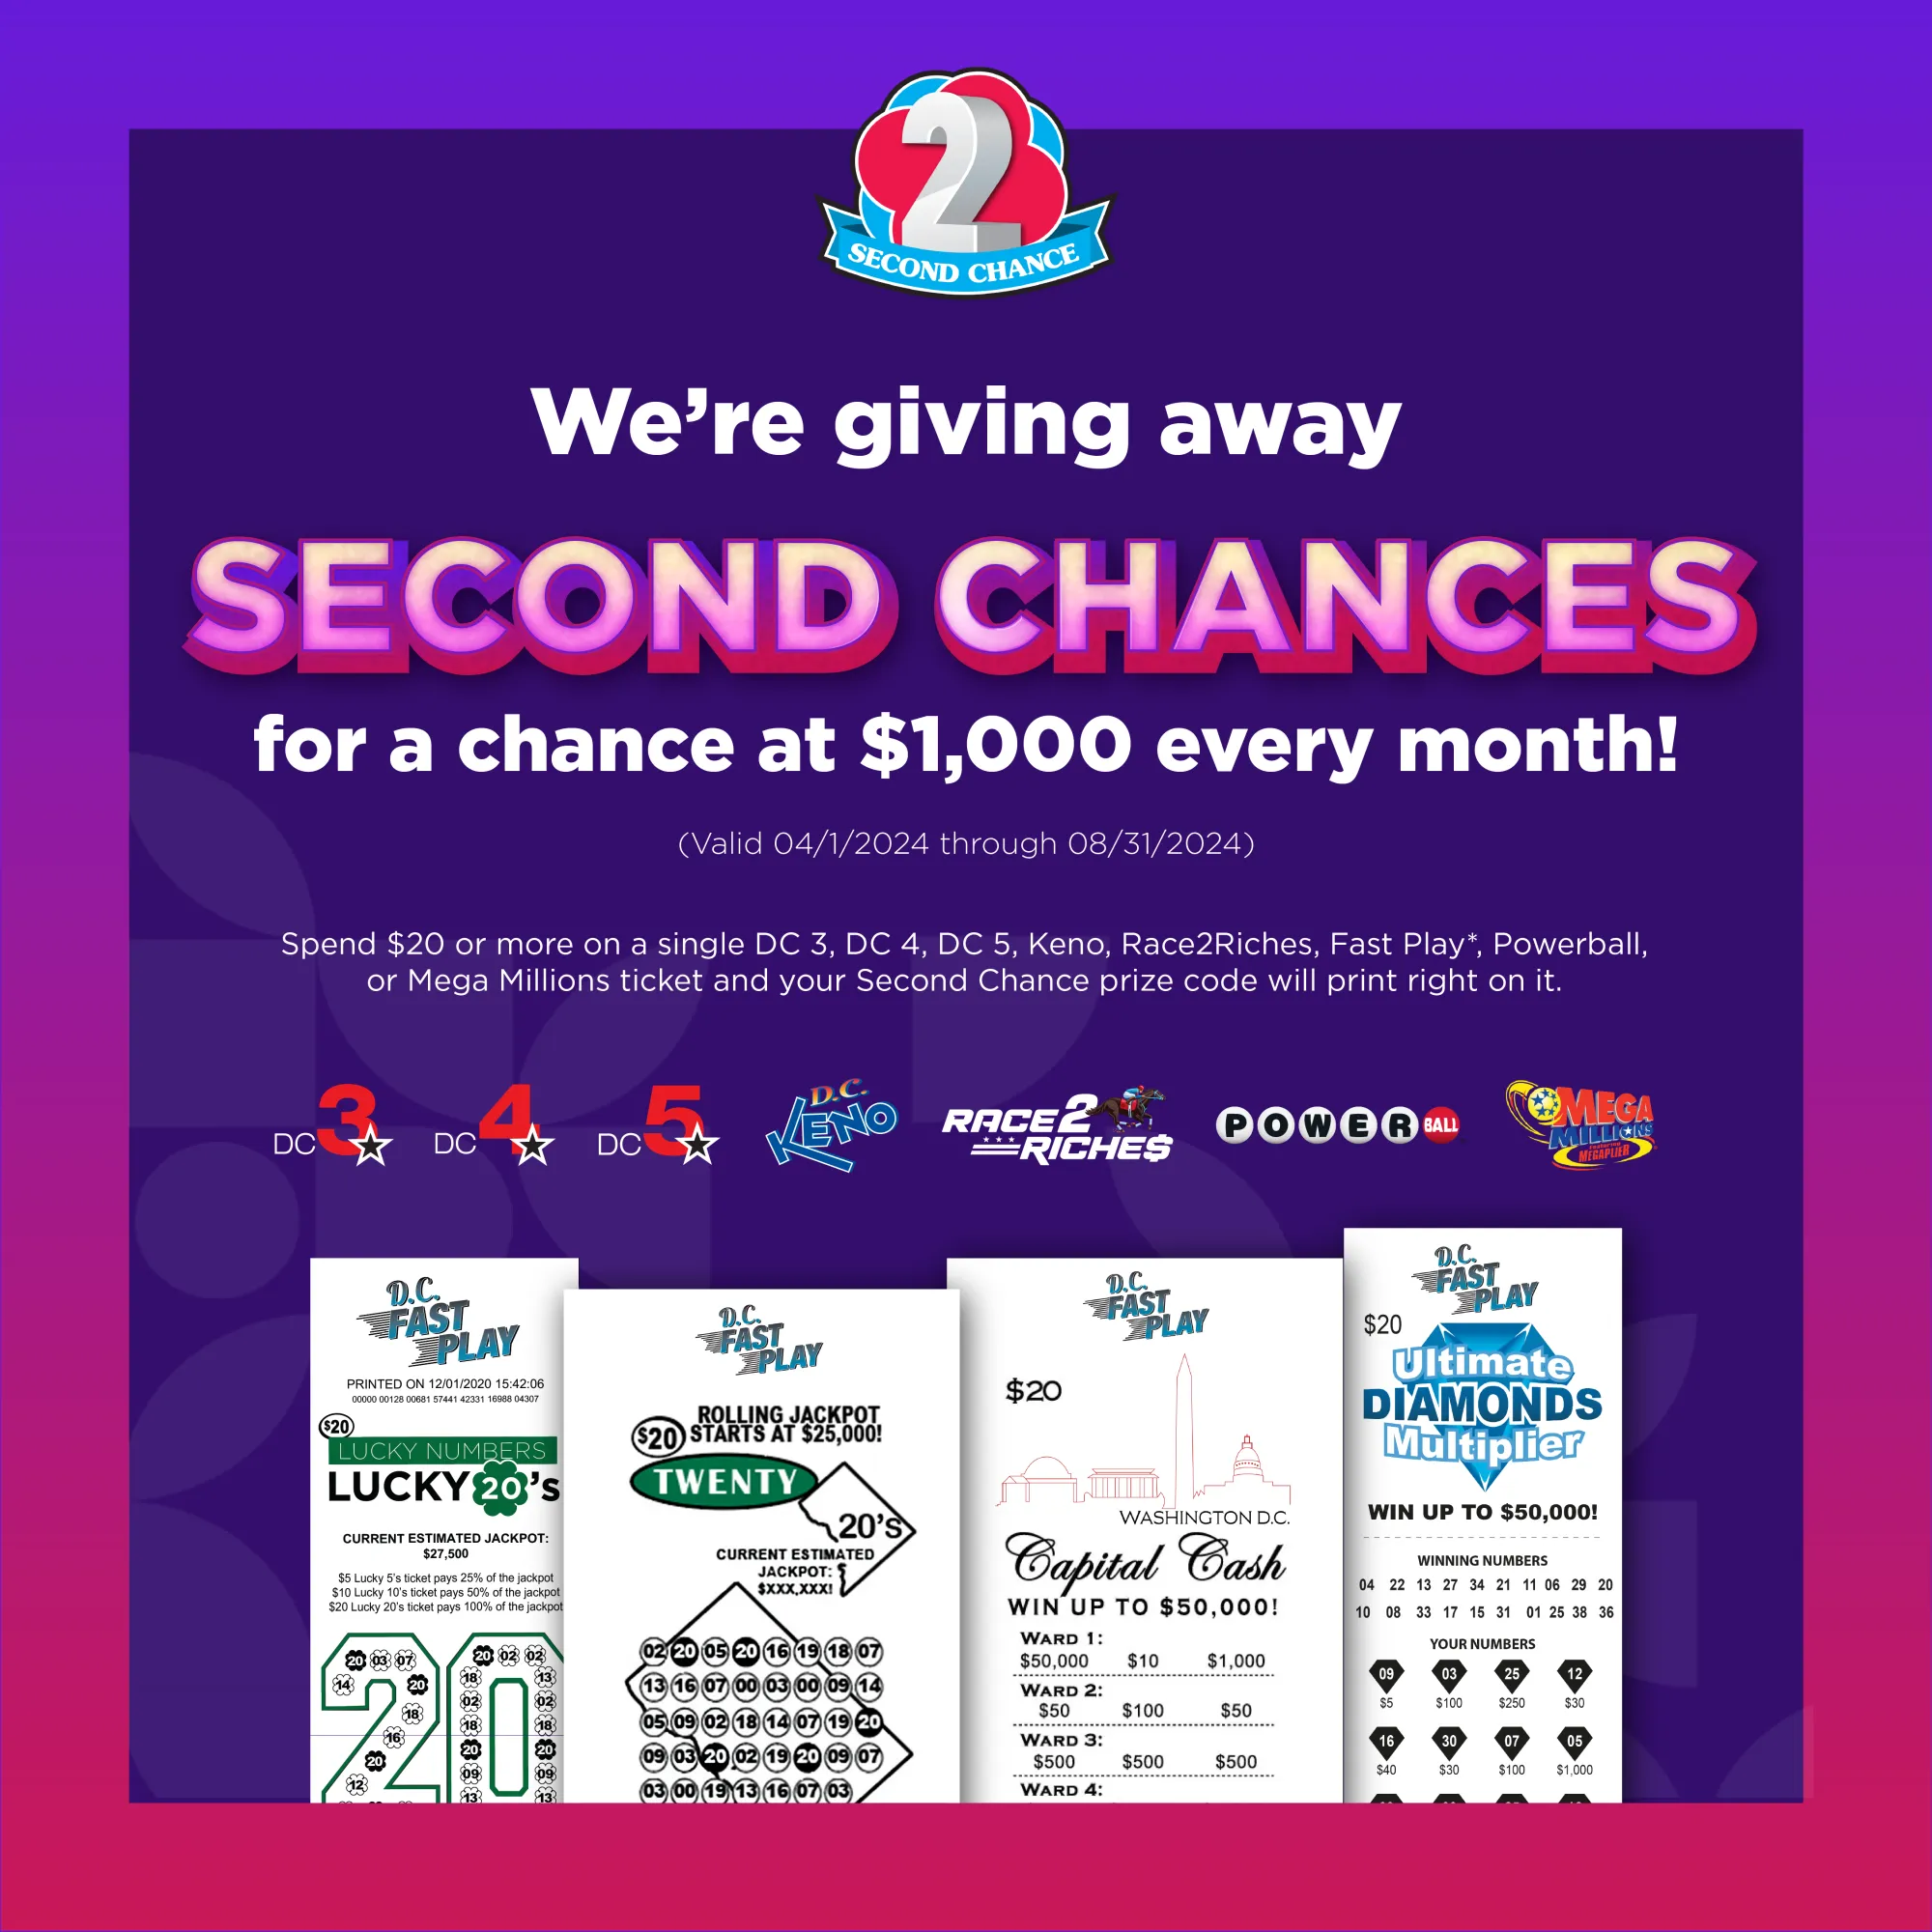 2nd Chance to Win